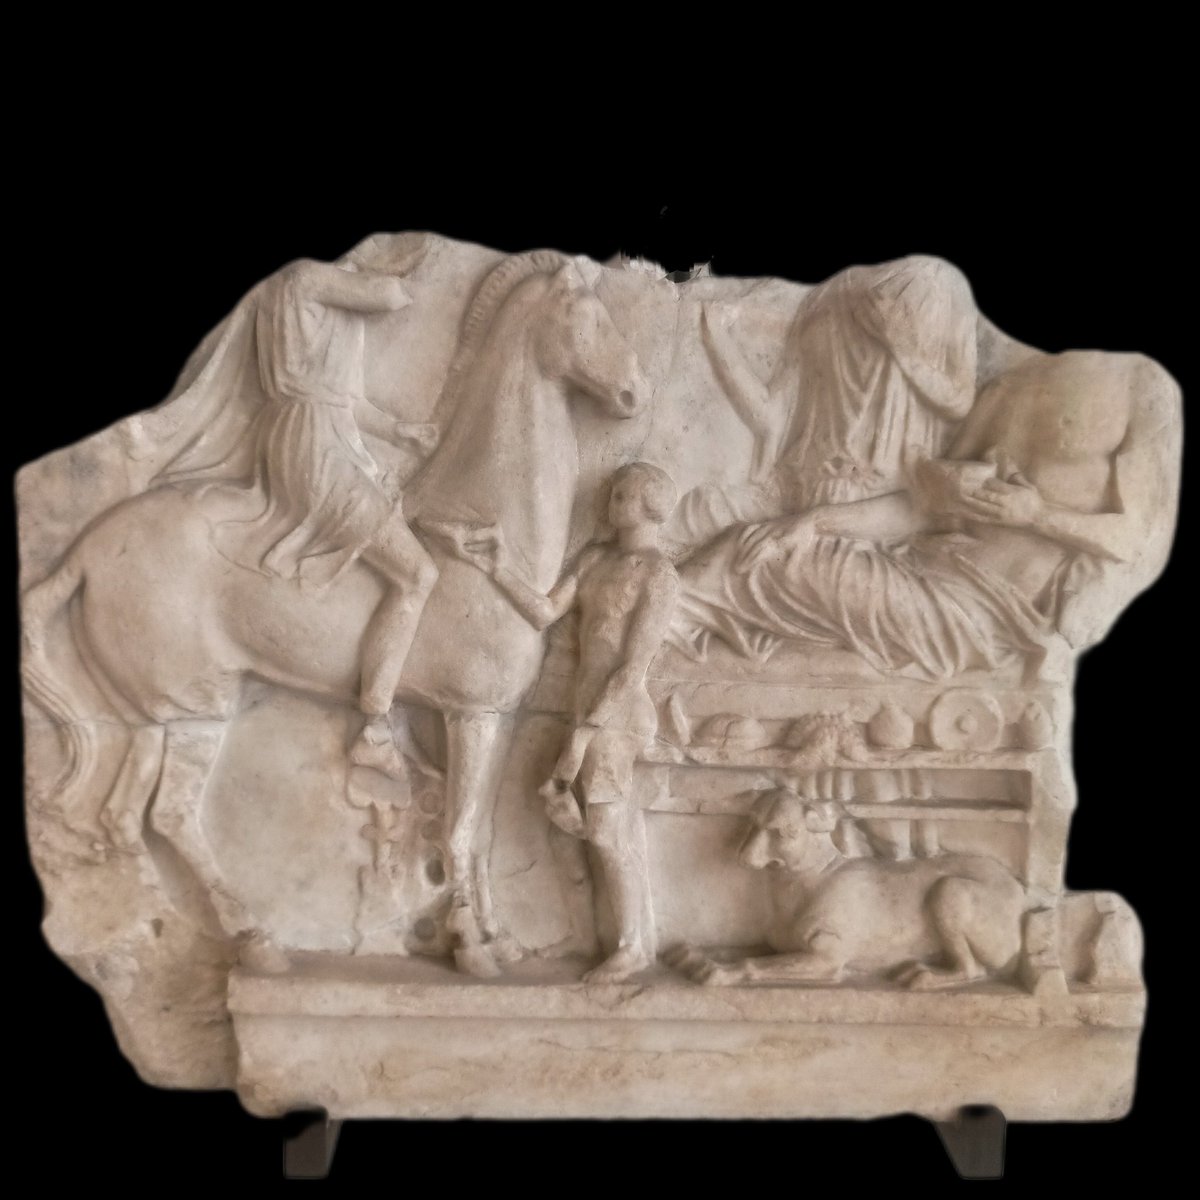 #ReliefWednesday 
Fragment of a Greek funerary stele with a riding youth and a banquet; second half of the 5th century BC; G. D. Weber collection, on display in room 5.
#museoarcheologicovenezia #Greece #collection #Archaeology #museum #Venice